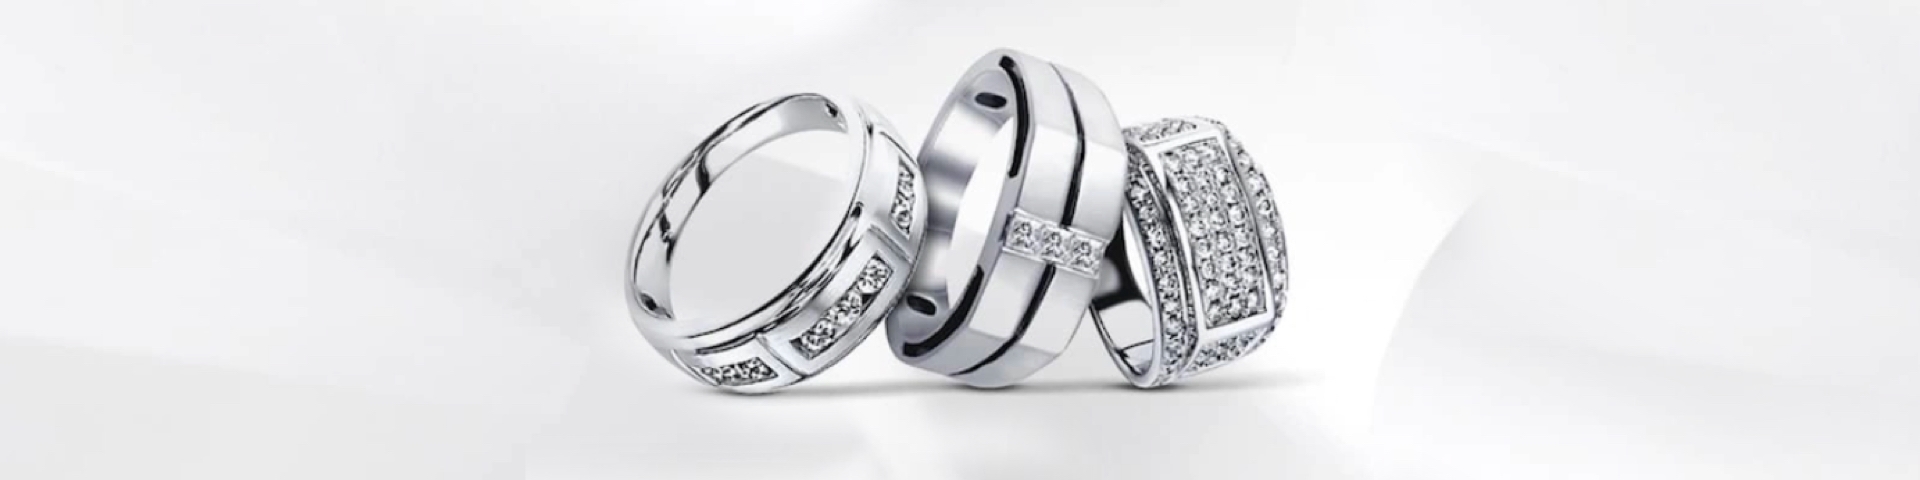 Three men's white gold rings on a grey background